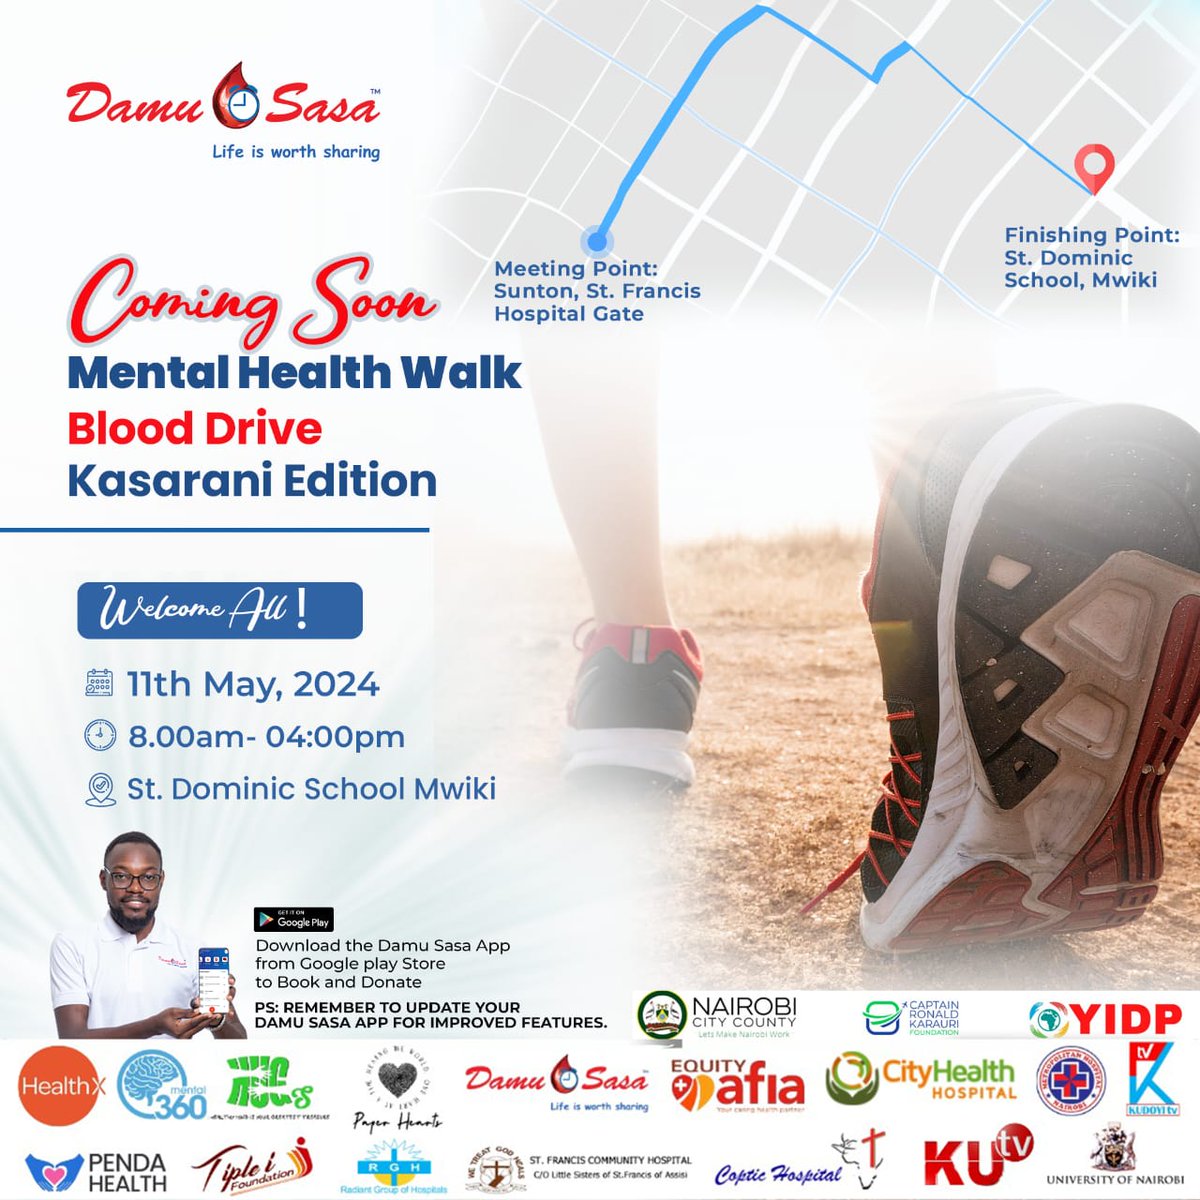 Join Kasarani Community for a Mental Health Walk. Help us to Raise Awareness and Support. Be a Lifesaver - Donate Blood at the Event! Coming Soon on the 11th of May 2024. Save the date! #MentalHealthWalk #KasaraniBloodDrive #KasaraniEdition #Savelife